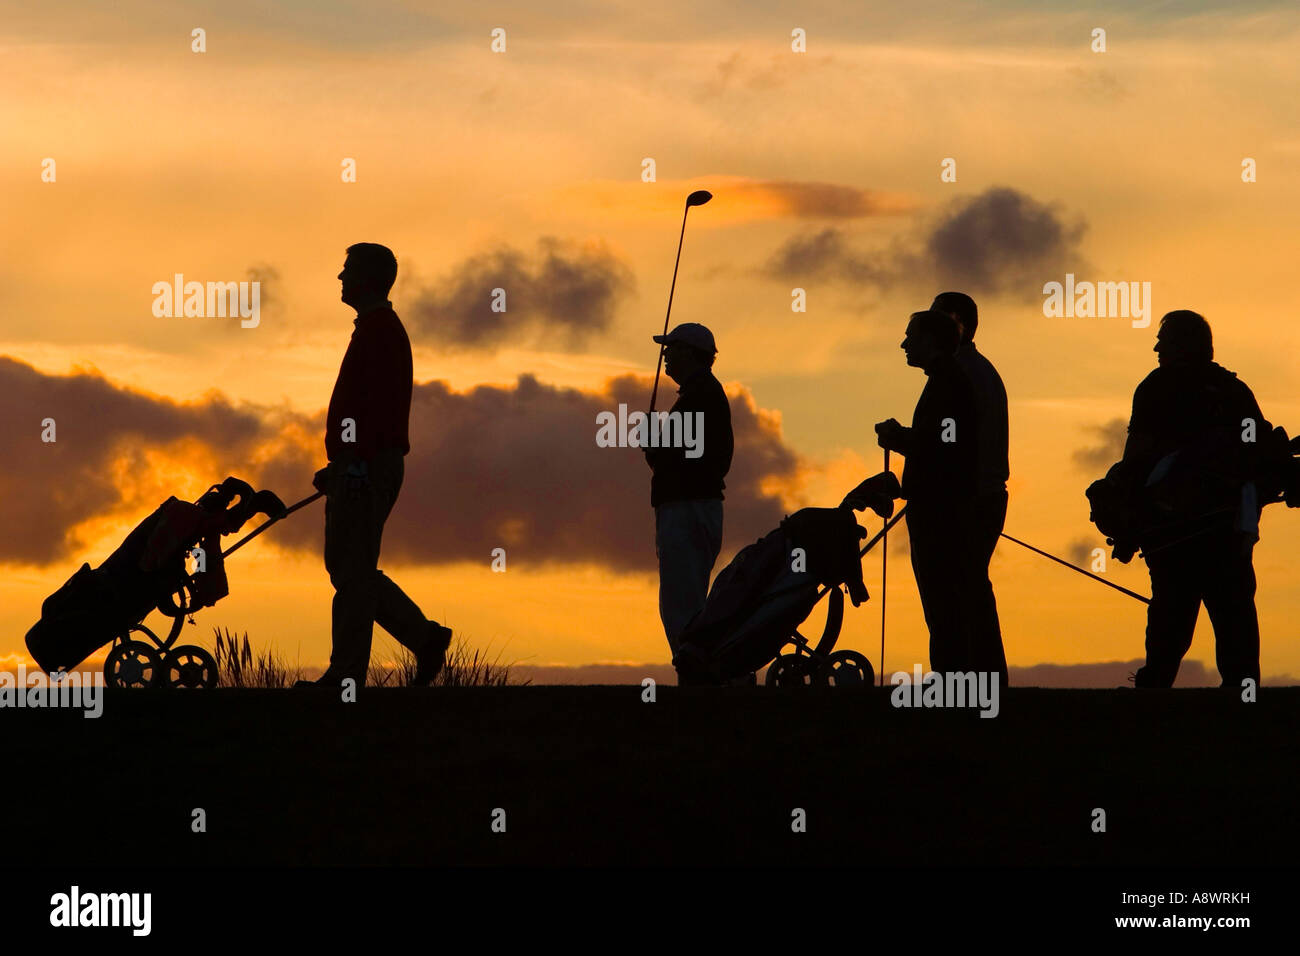 The last hole of the day. Five golfers stand on the last tee in the setting sun. Stock Photo